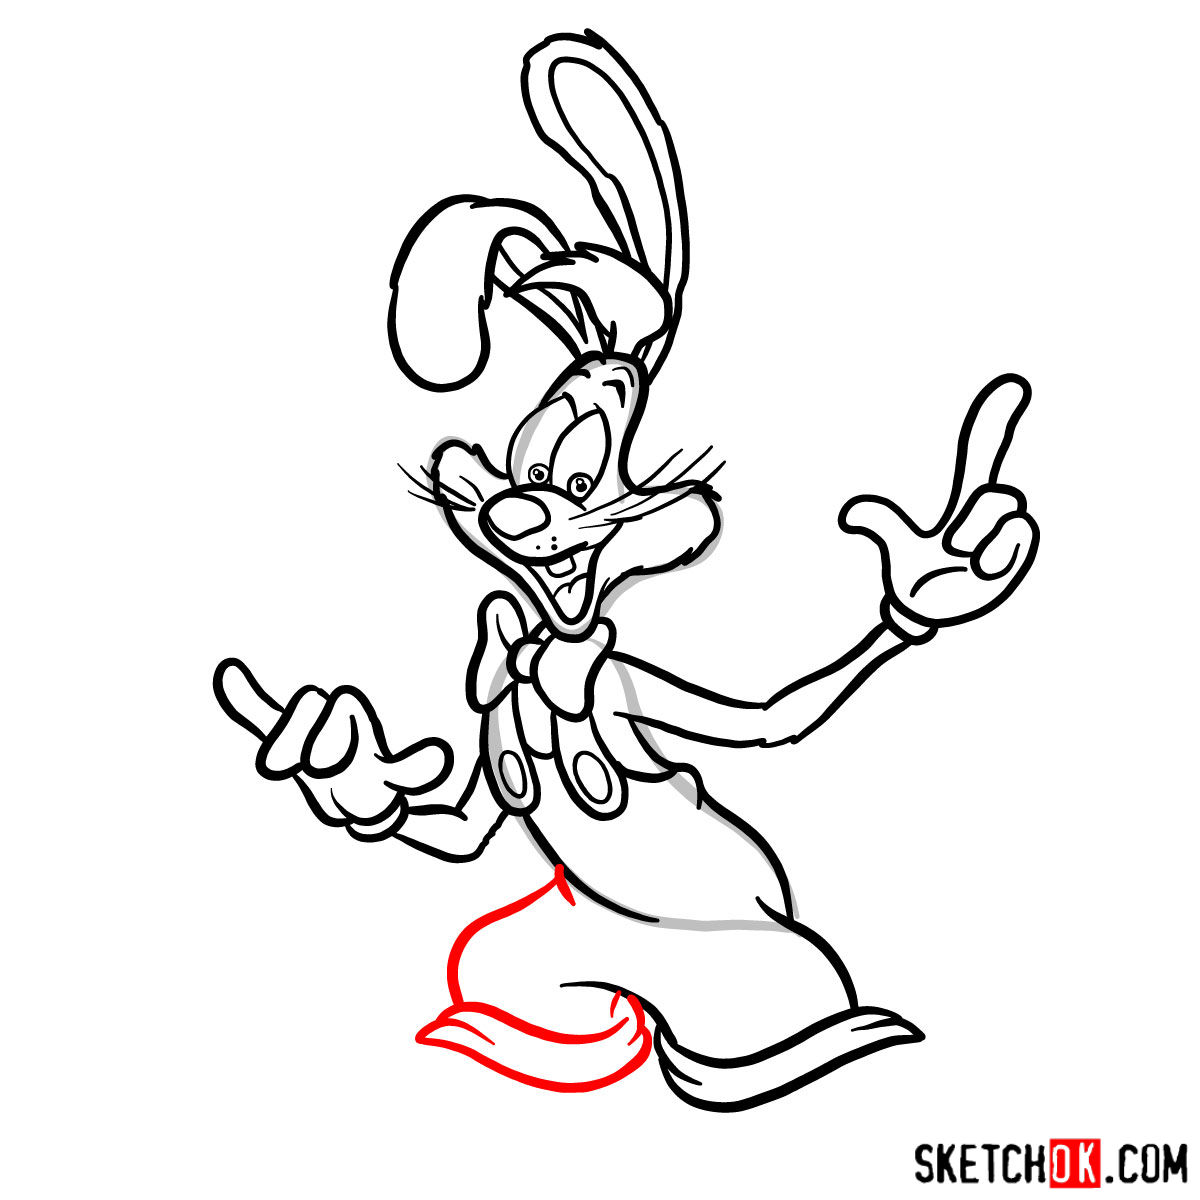 How to draw Roger Rabbit - step 12.